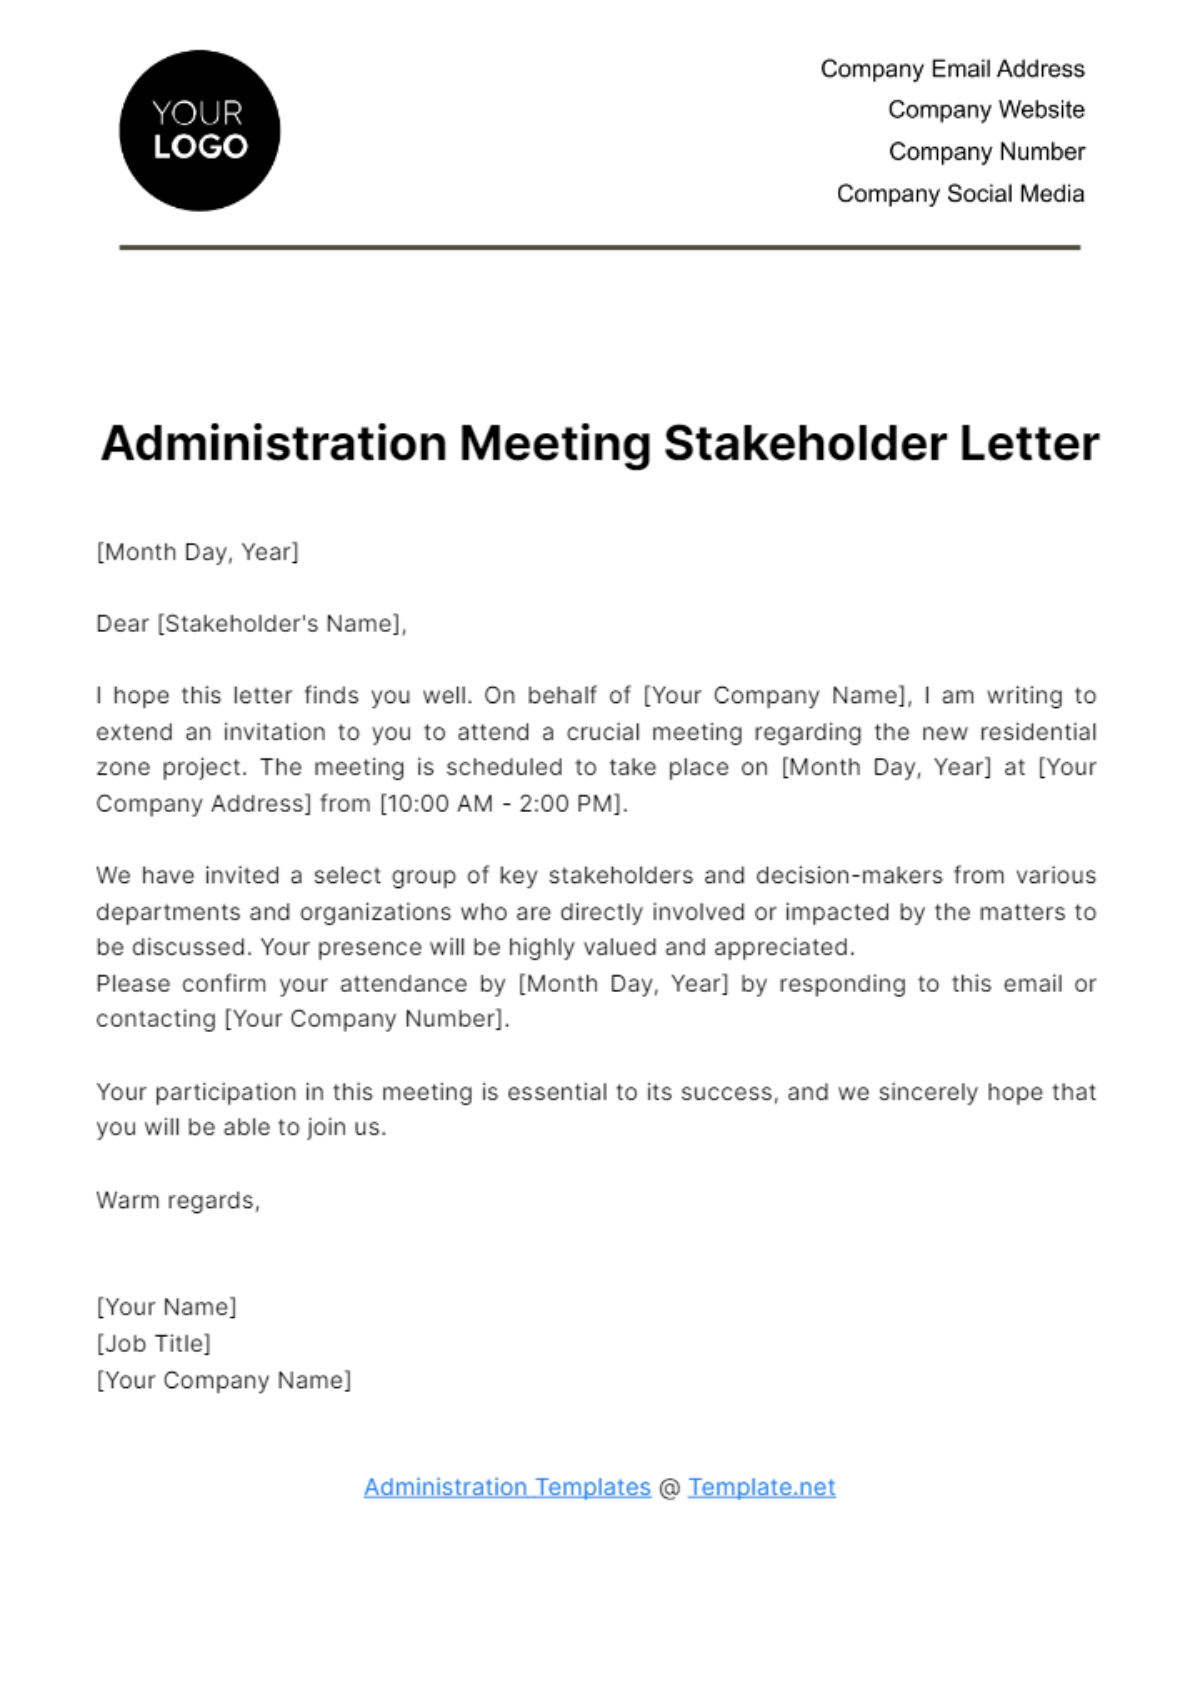 Administration Meeting Stakeholder Letter Template